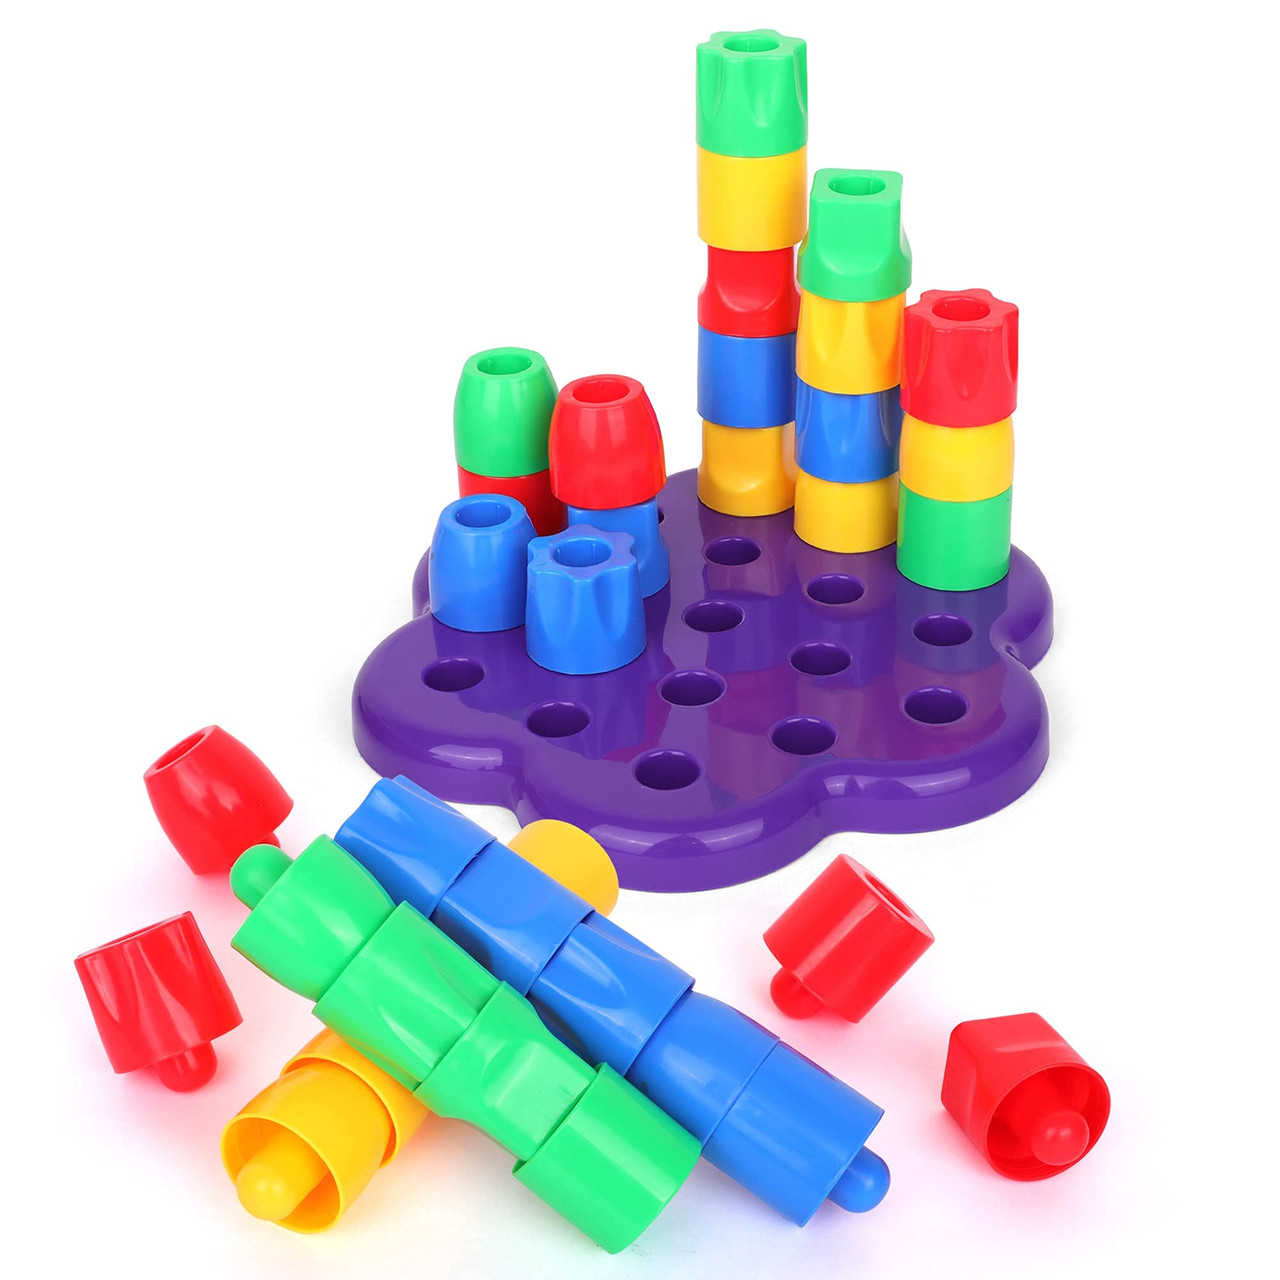 Playkidiz My First Pegs Playset, Large Colored and Fun Shape